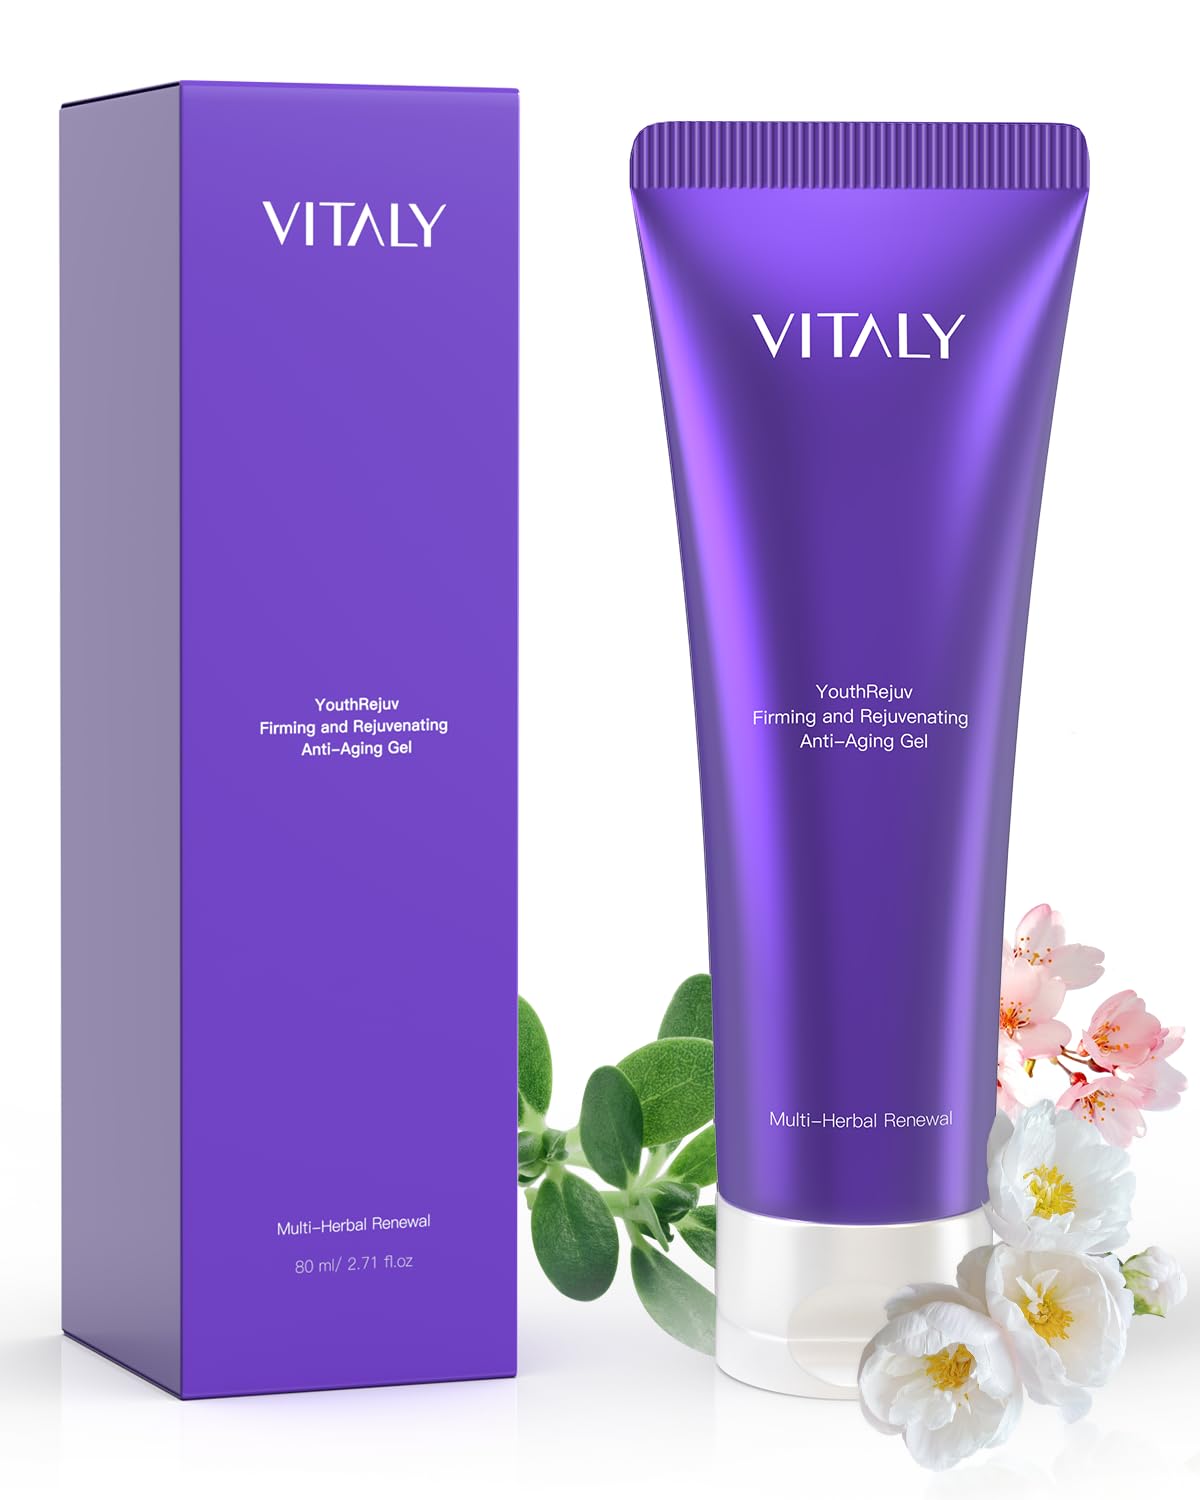 VITALY's Radio Frequency Skin Tightening Device + Conductive Gel Pack, Discover Youthful Radiance